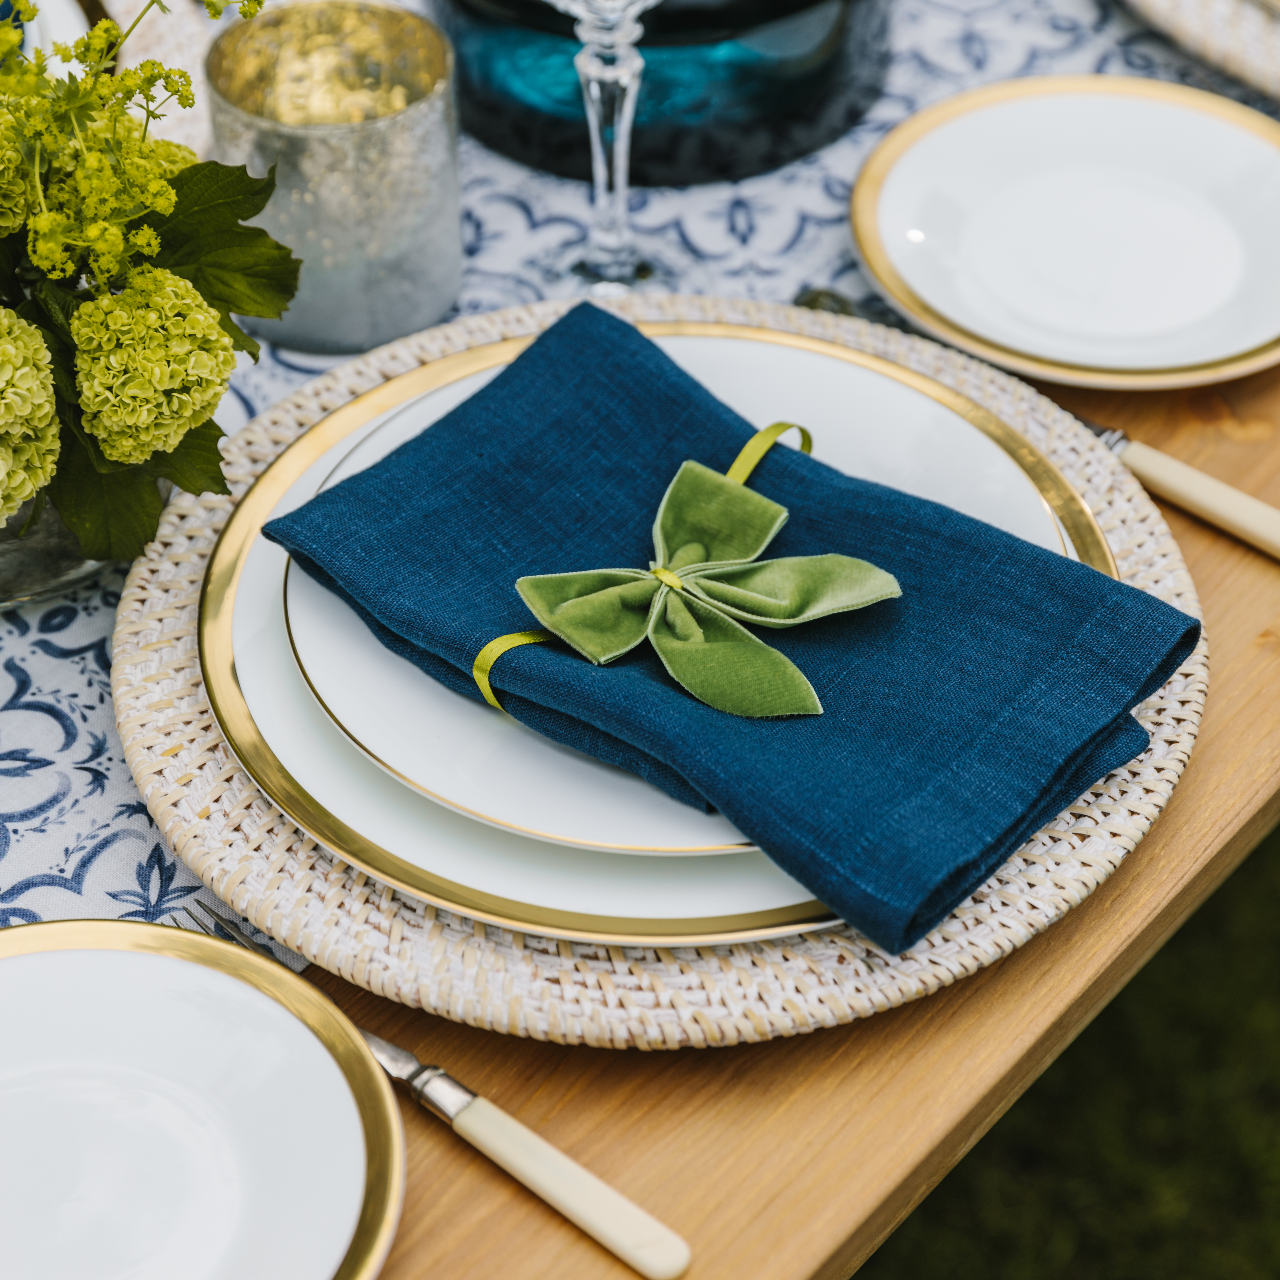 Navy linen napkin folded at a place setting and tied with a moss green velvet napkin bow. The place setting includes a white wash rattan charger plate, gold trimmed crockery and a blue and white mosaic linen table runner.